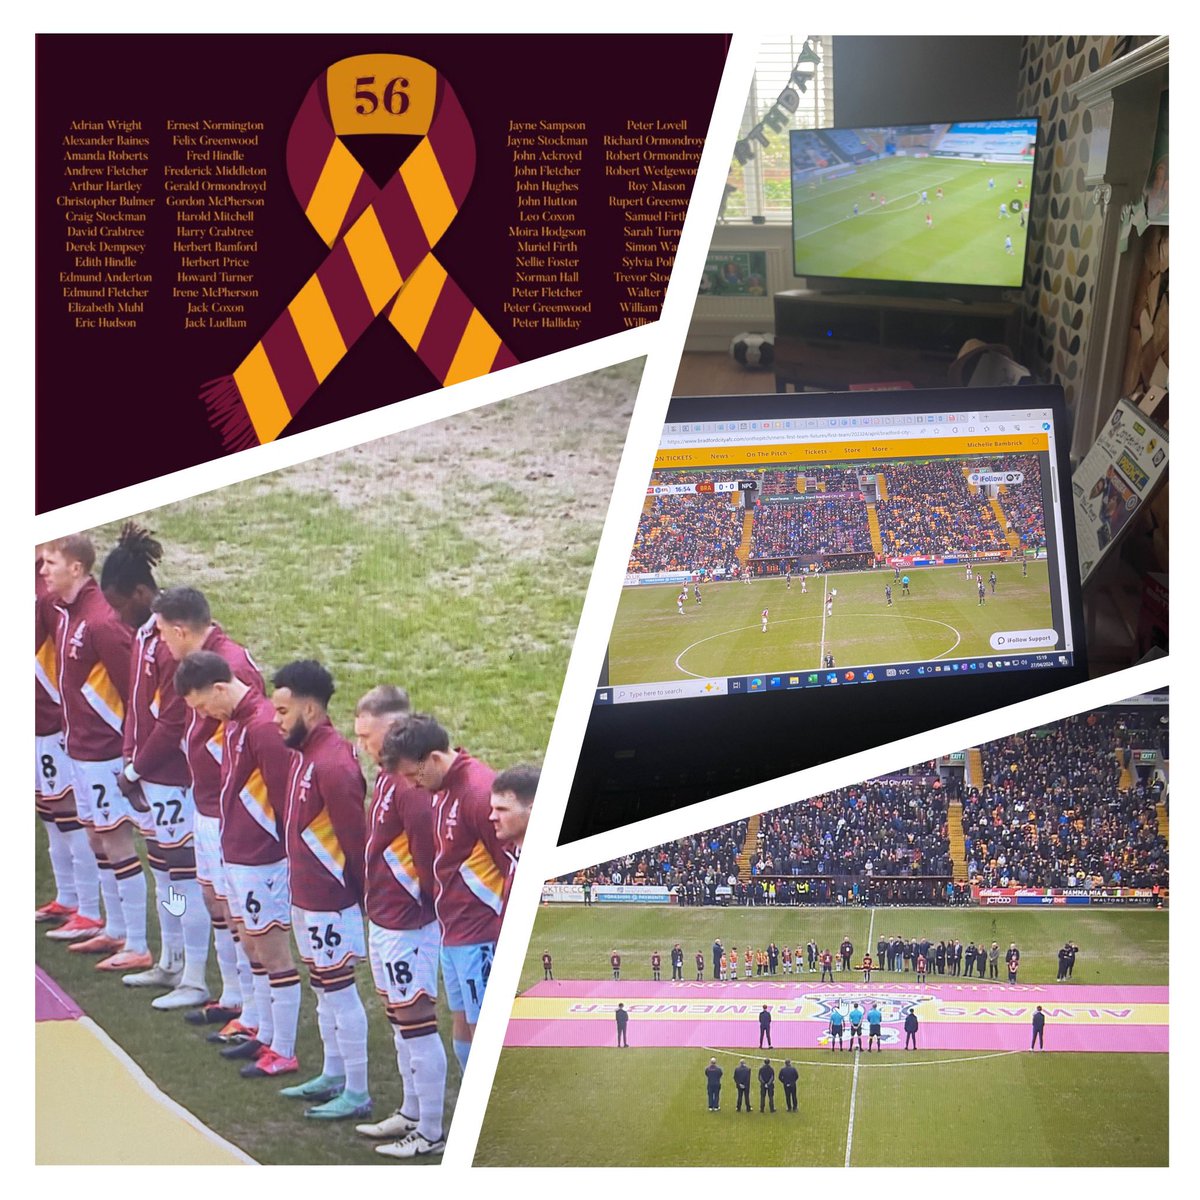 Last match of the season is always emotional ♥️💛 Lets make this one extra special @officialbantams with a win & chance of playoffs 🤞#alwaysremembered #56 #CTID #bcafc 🐓#ifollow #comeonmansfield #comeongrimsby